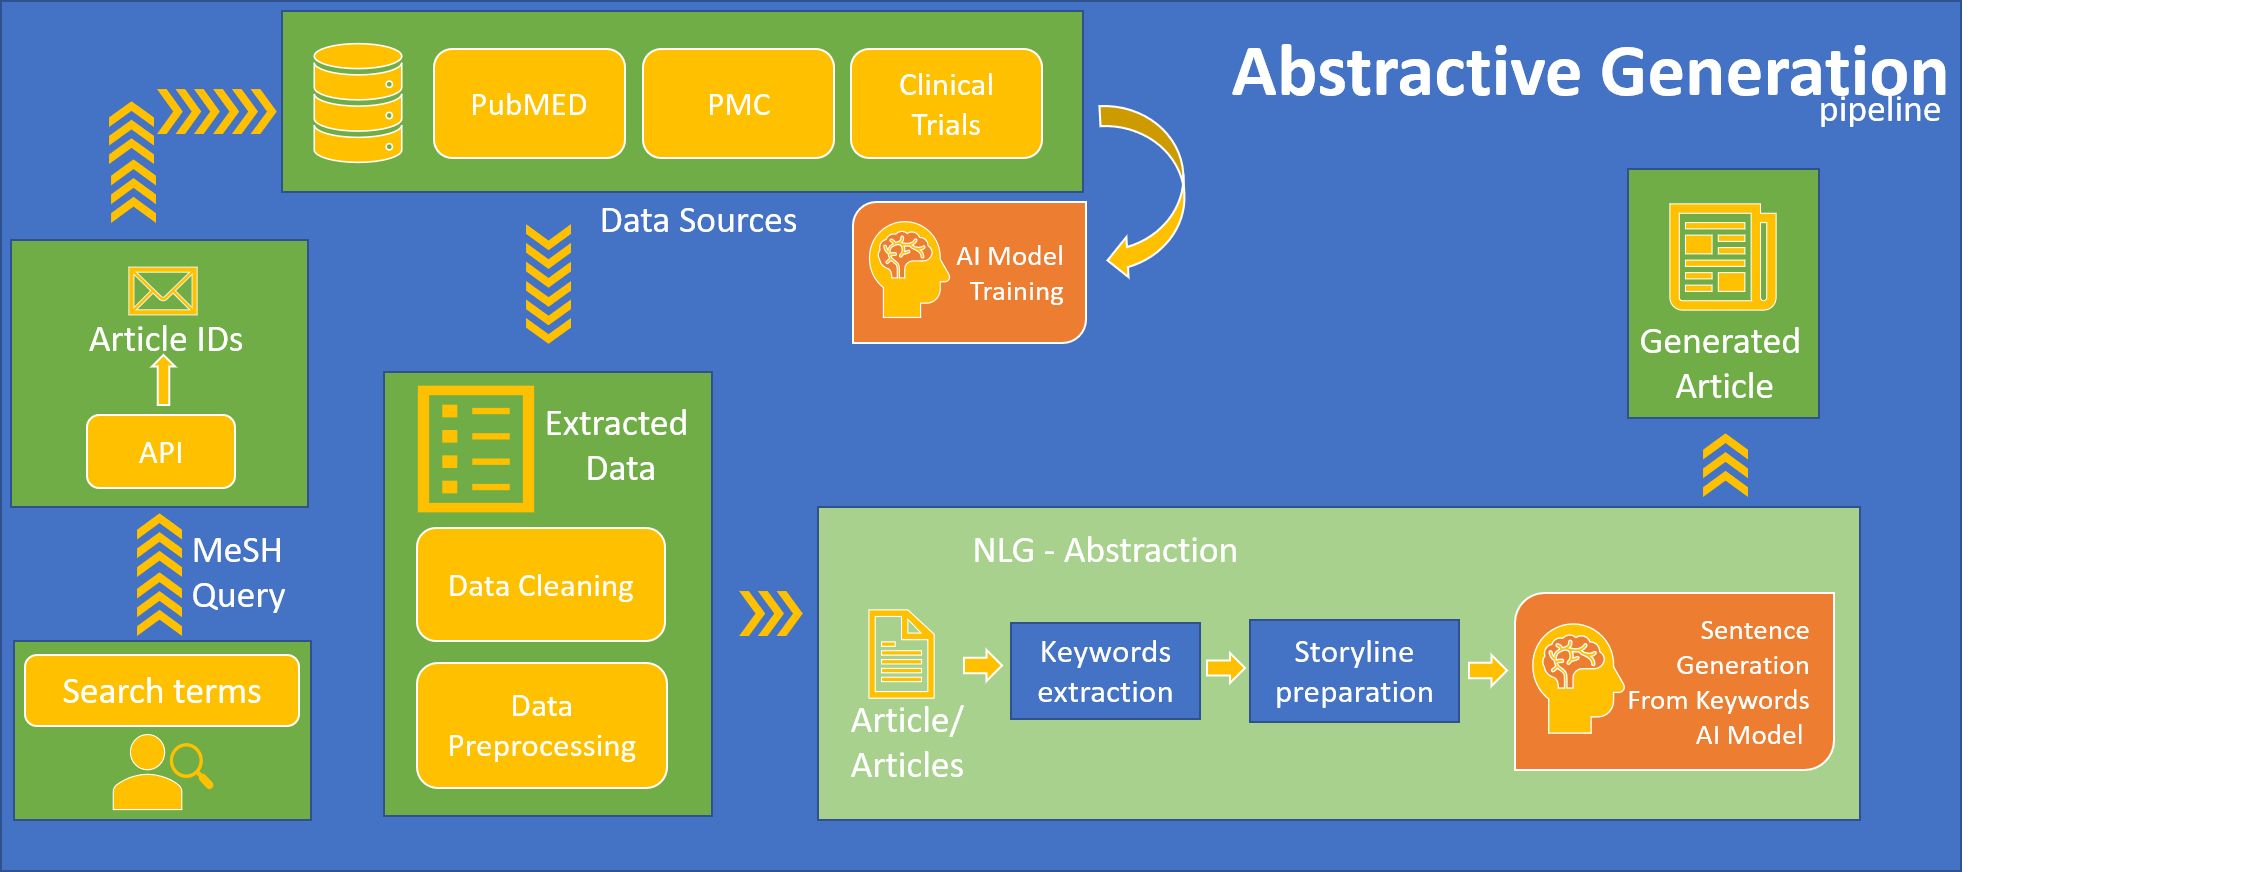 Figure 1. Abstractive Generation